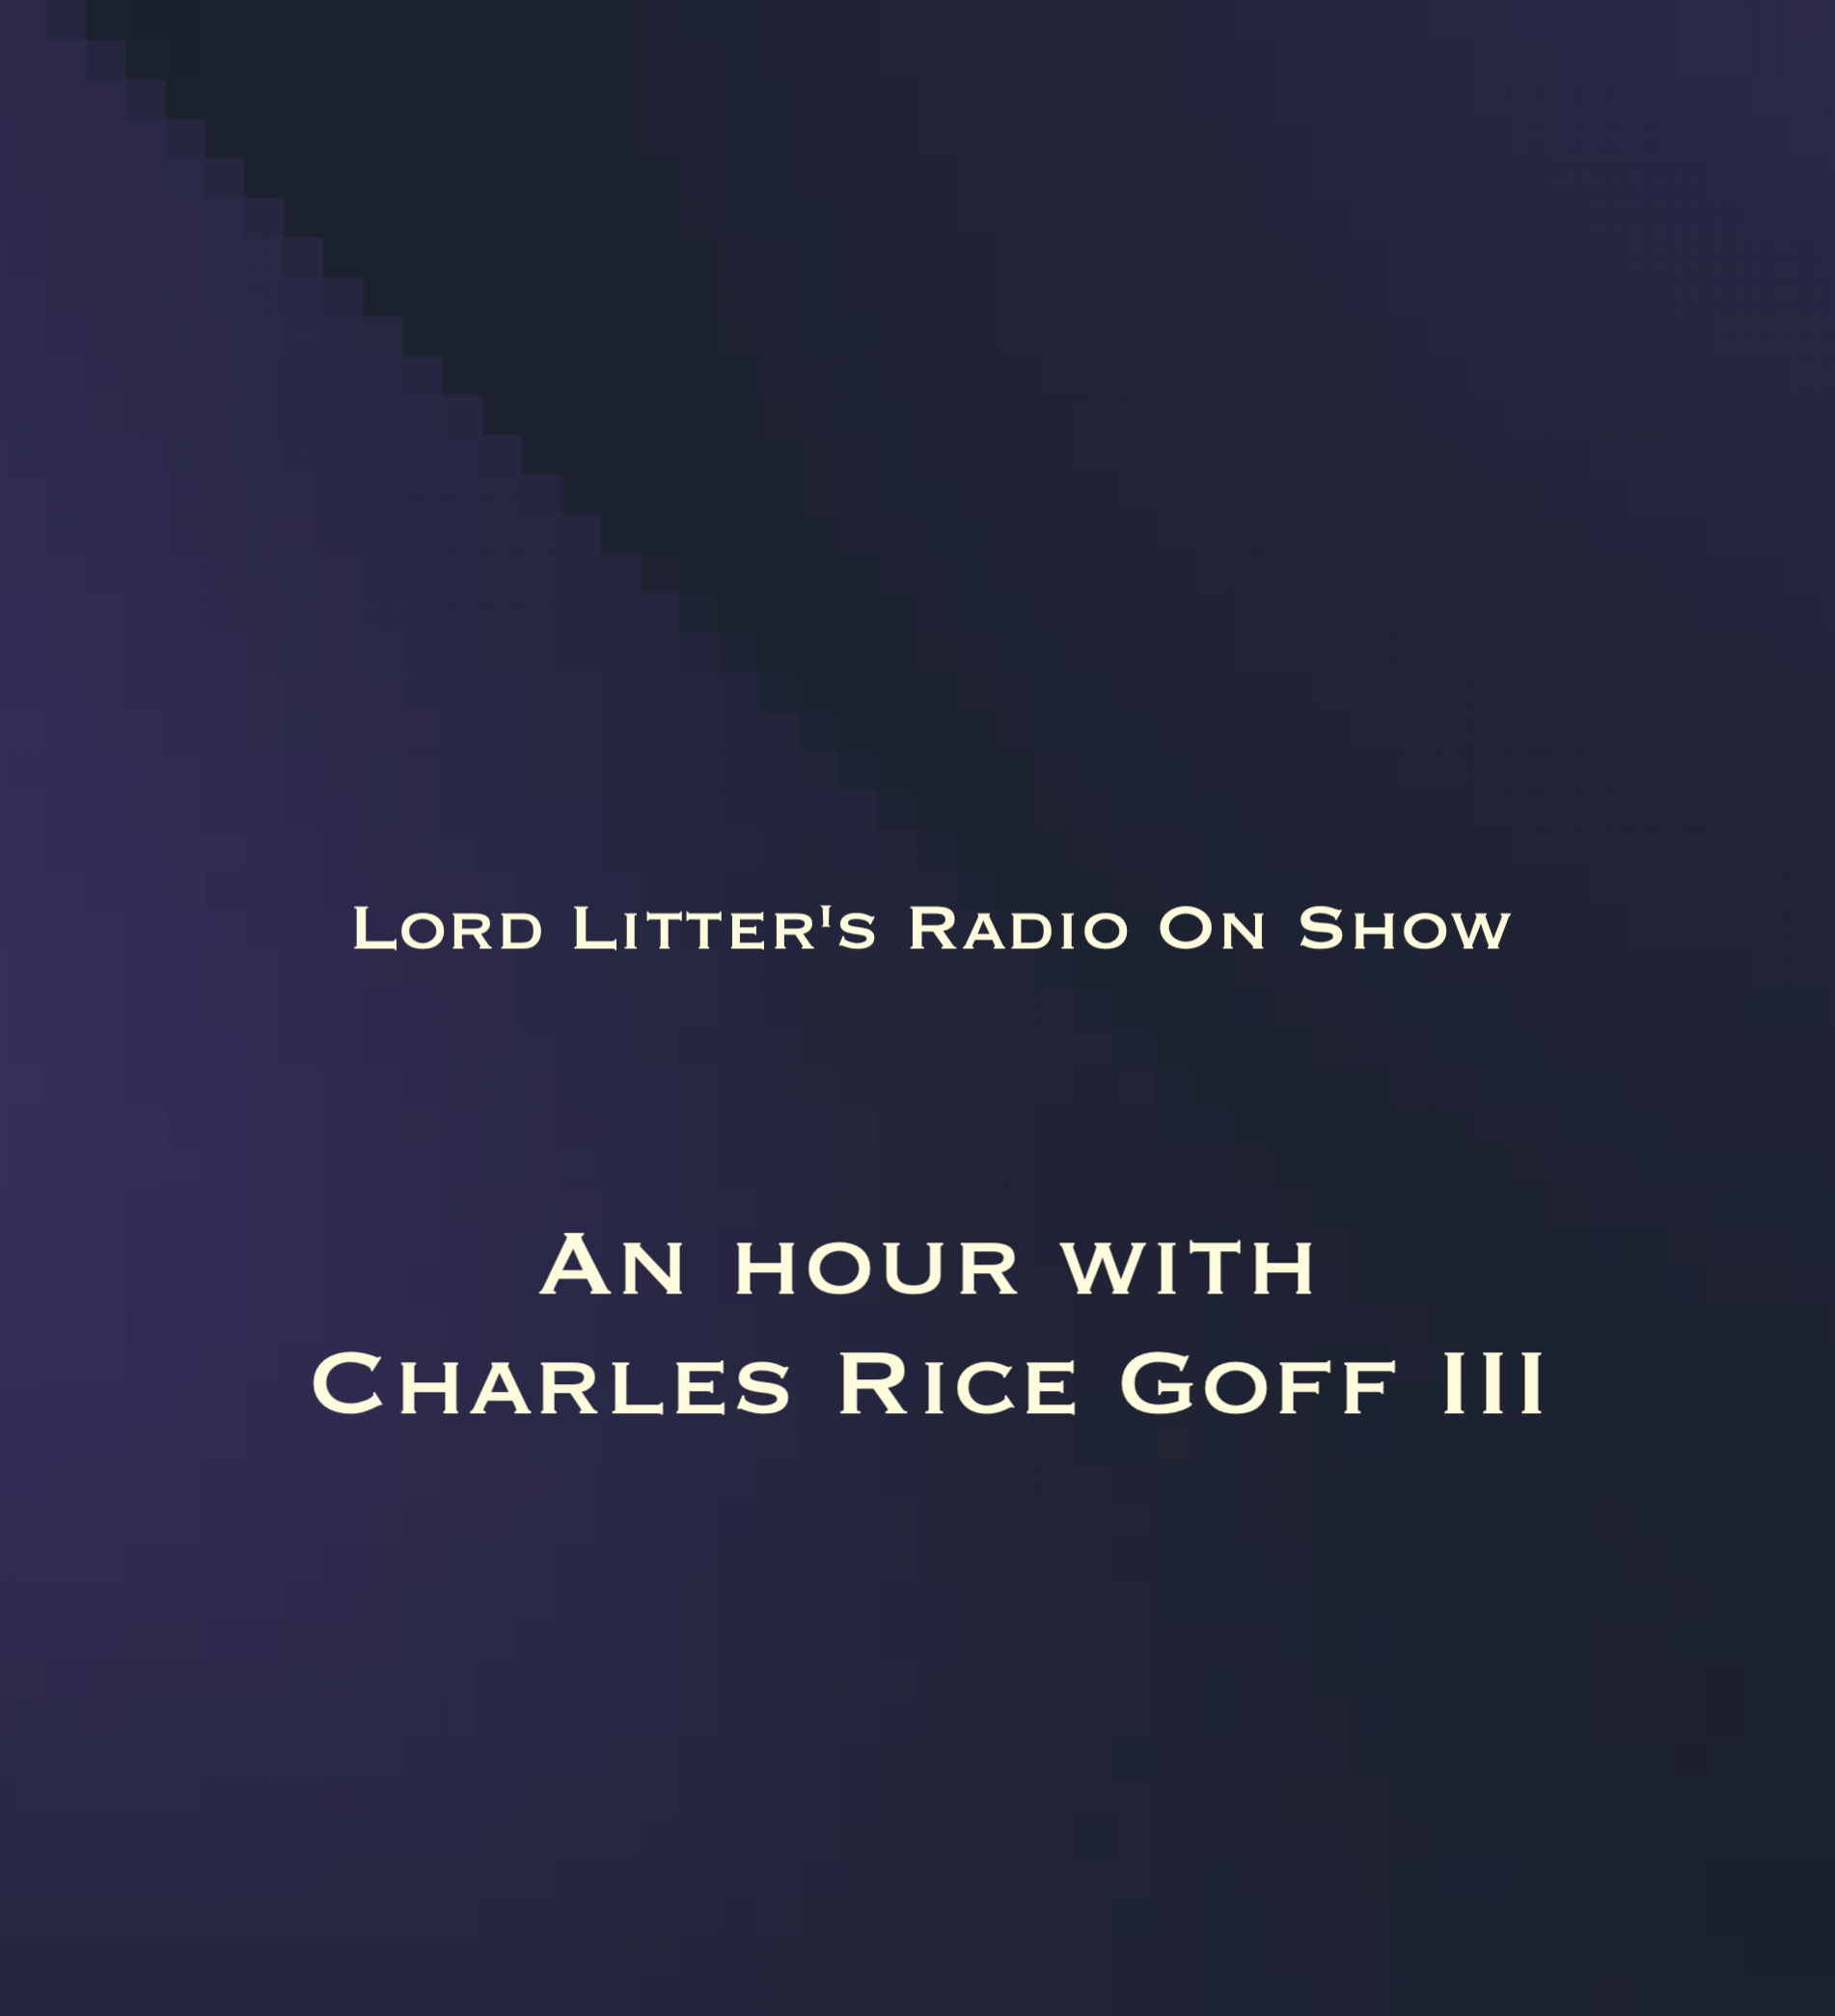 Lord Litter’s Radio On Show – An hour with Charles Rice Goff III